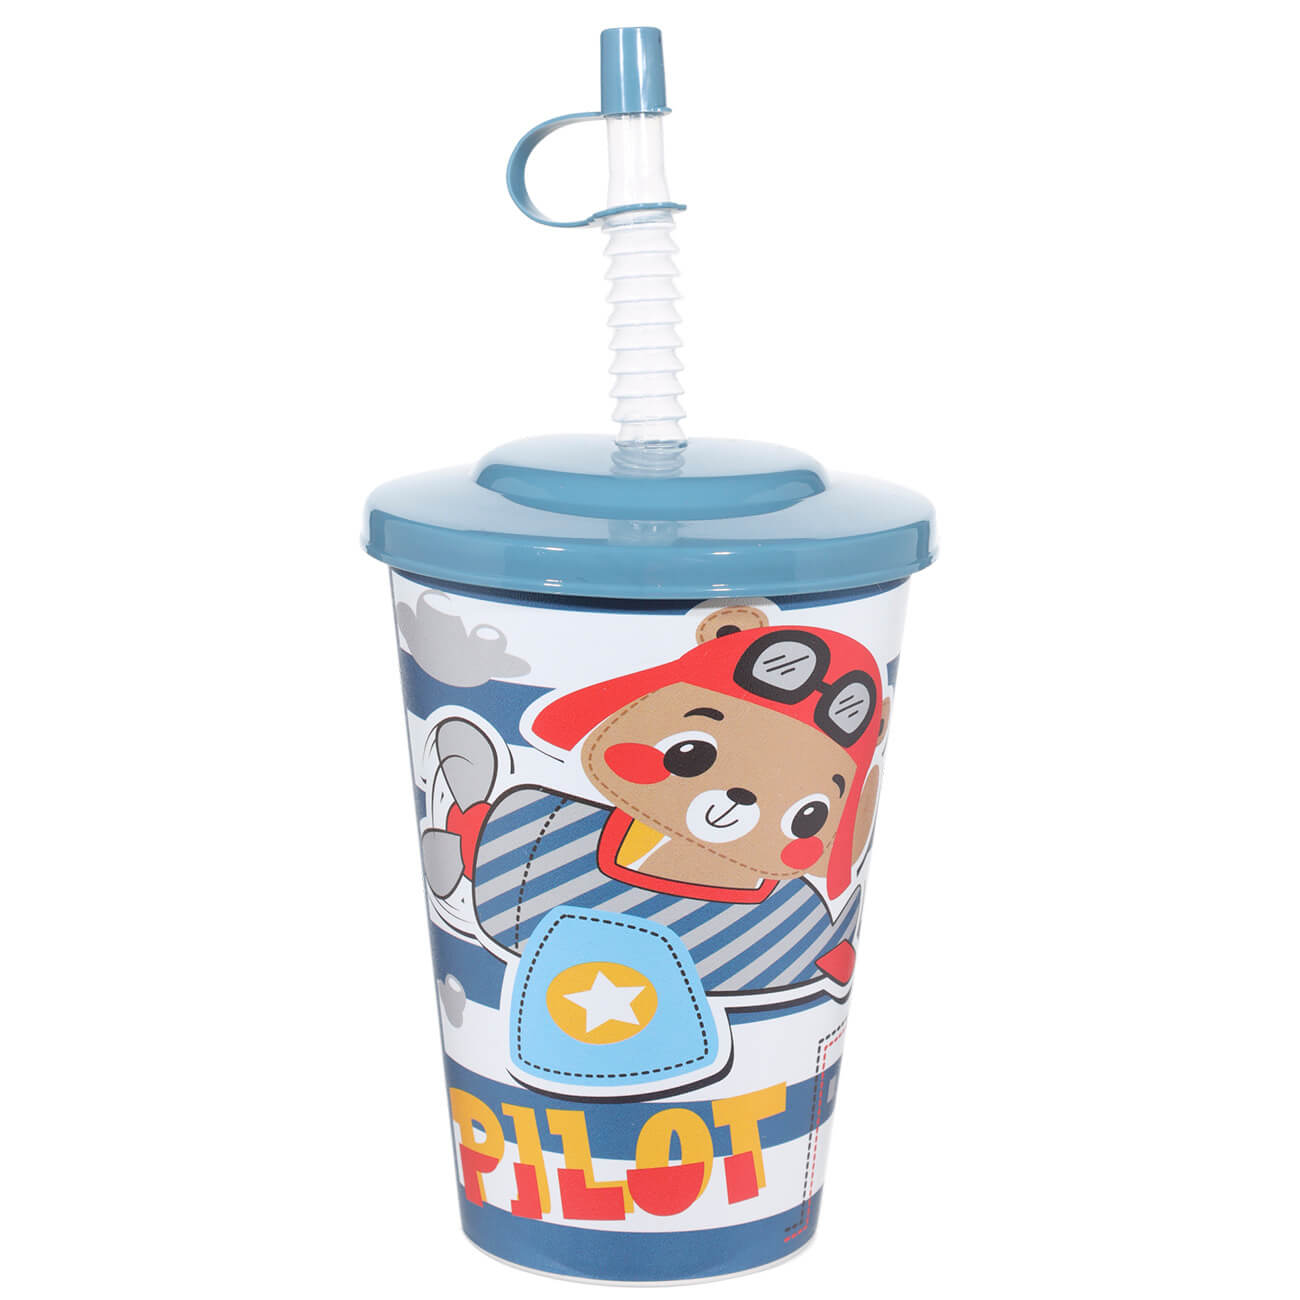 Glass, children's, 500 ml, with lid and tube, plastic, white and blue, Pilot bear, Childhood изображение № 1